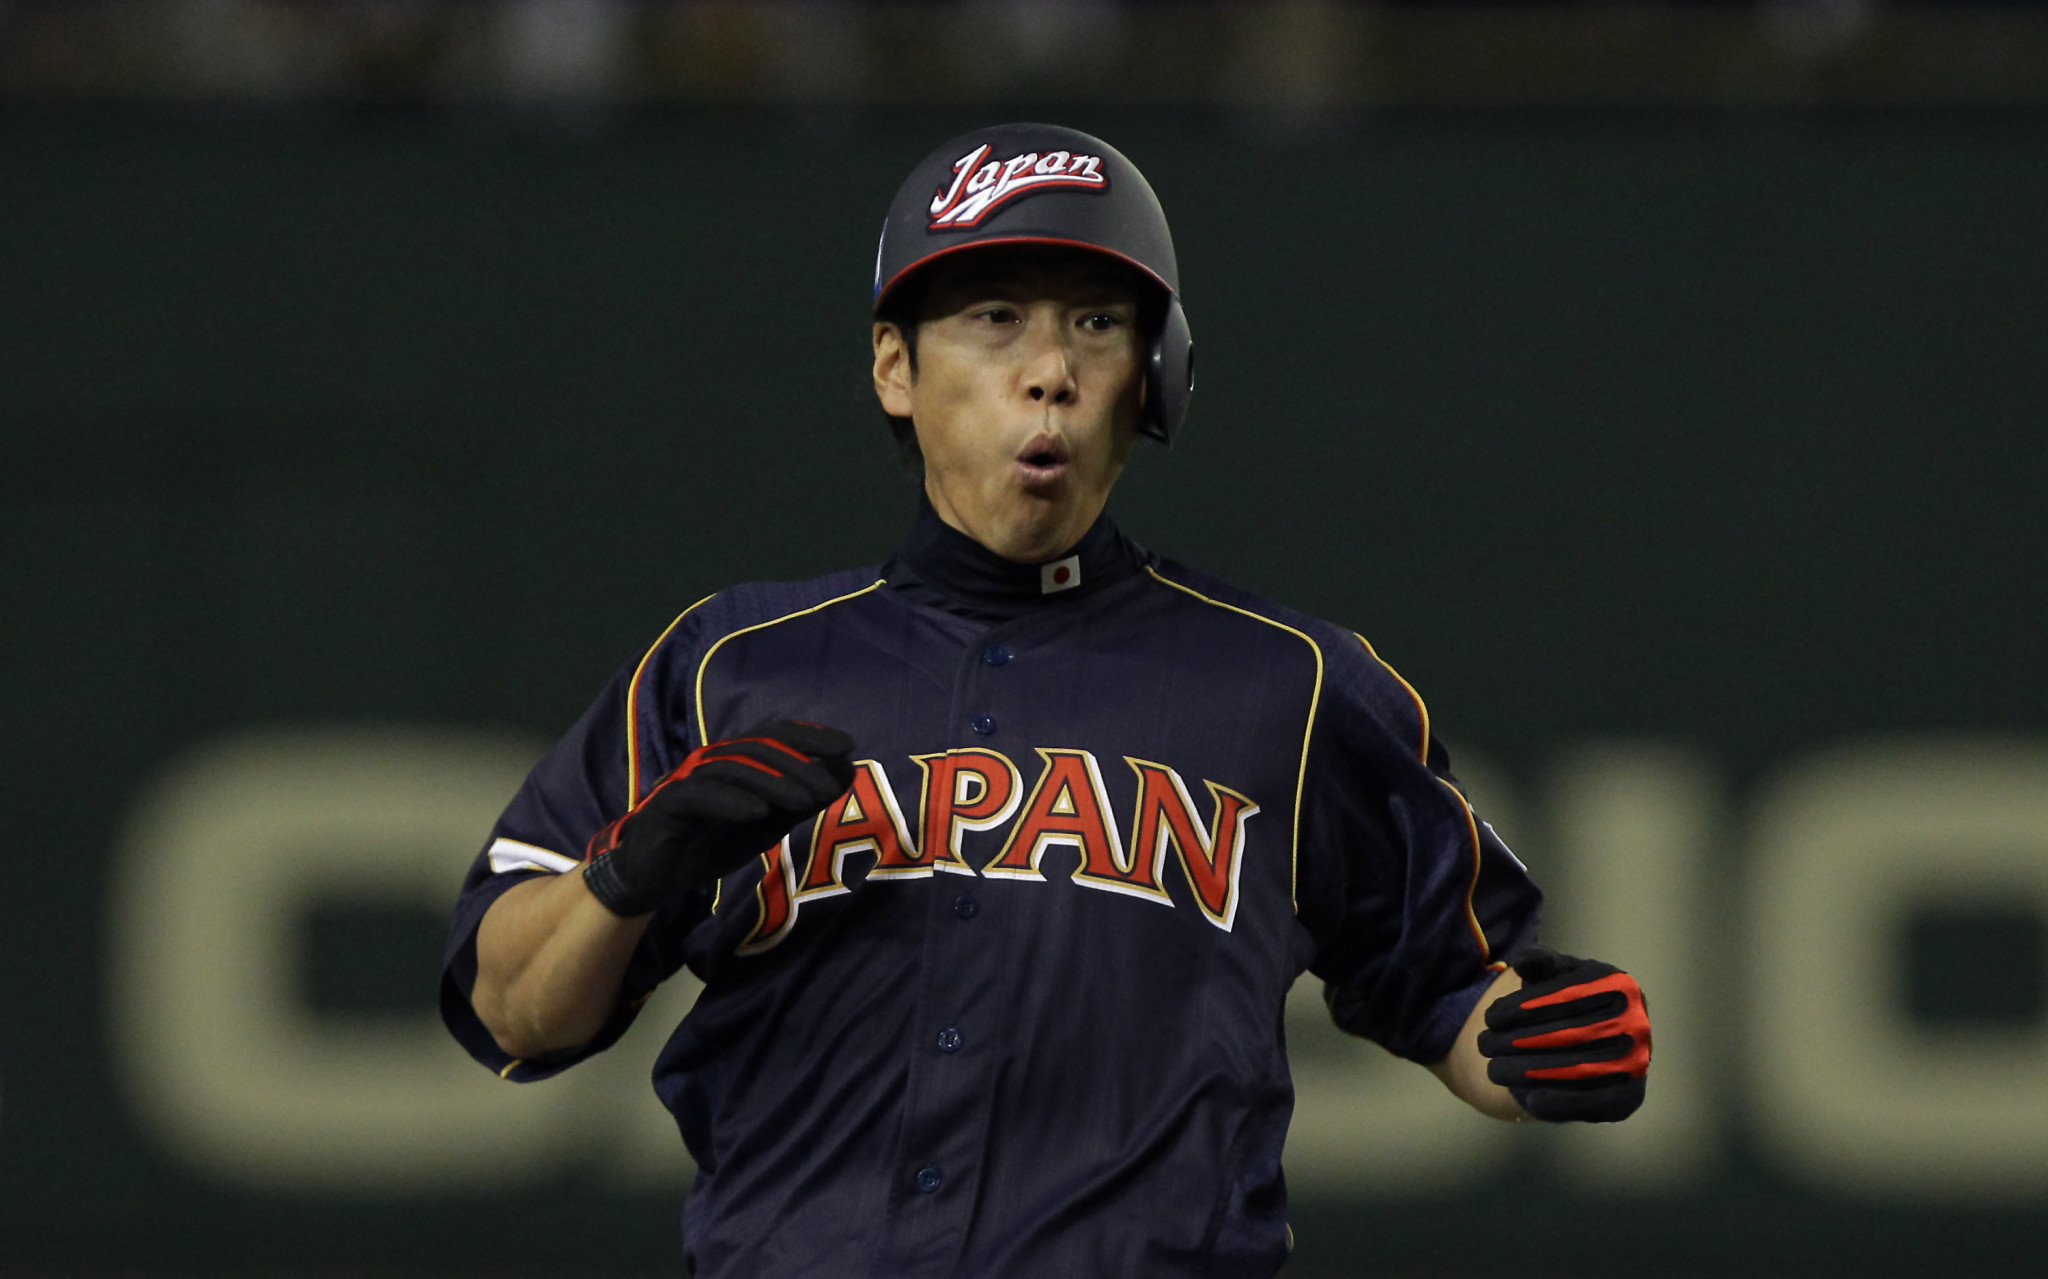 Defending champions Japan have appointed Hirokazu Ibata as their manager for the third edition of the WBSC Premier12 ©Getty Images